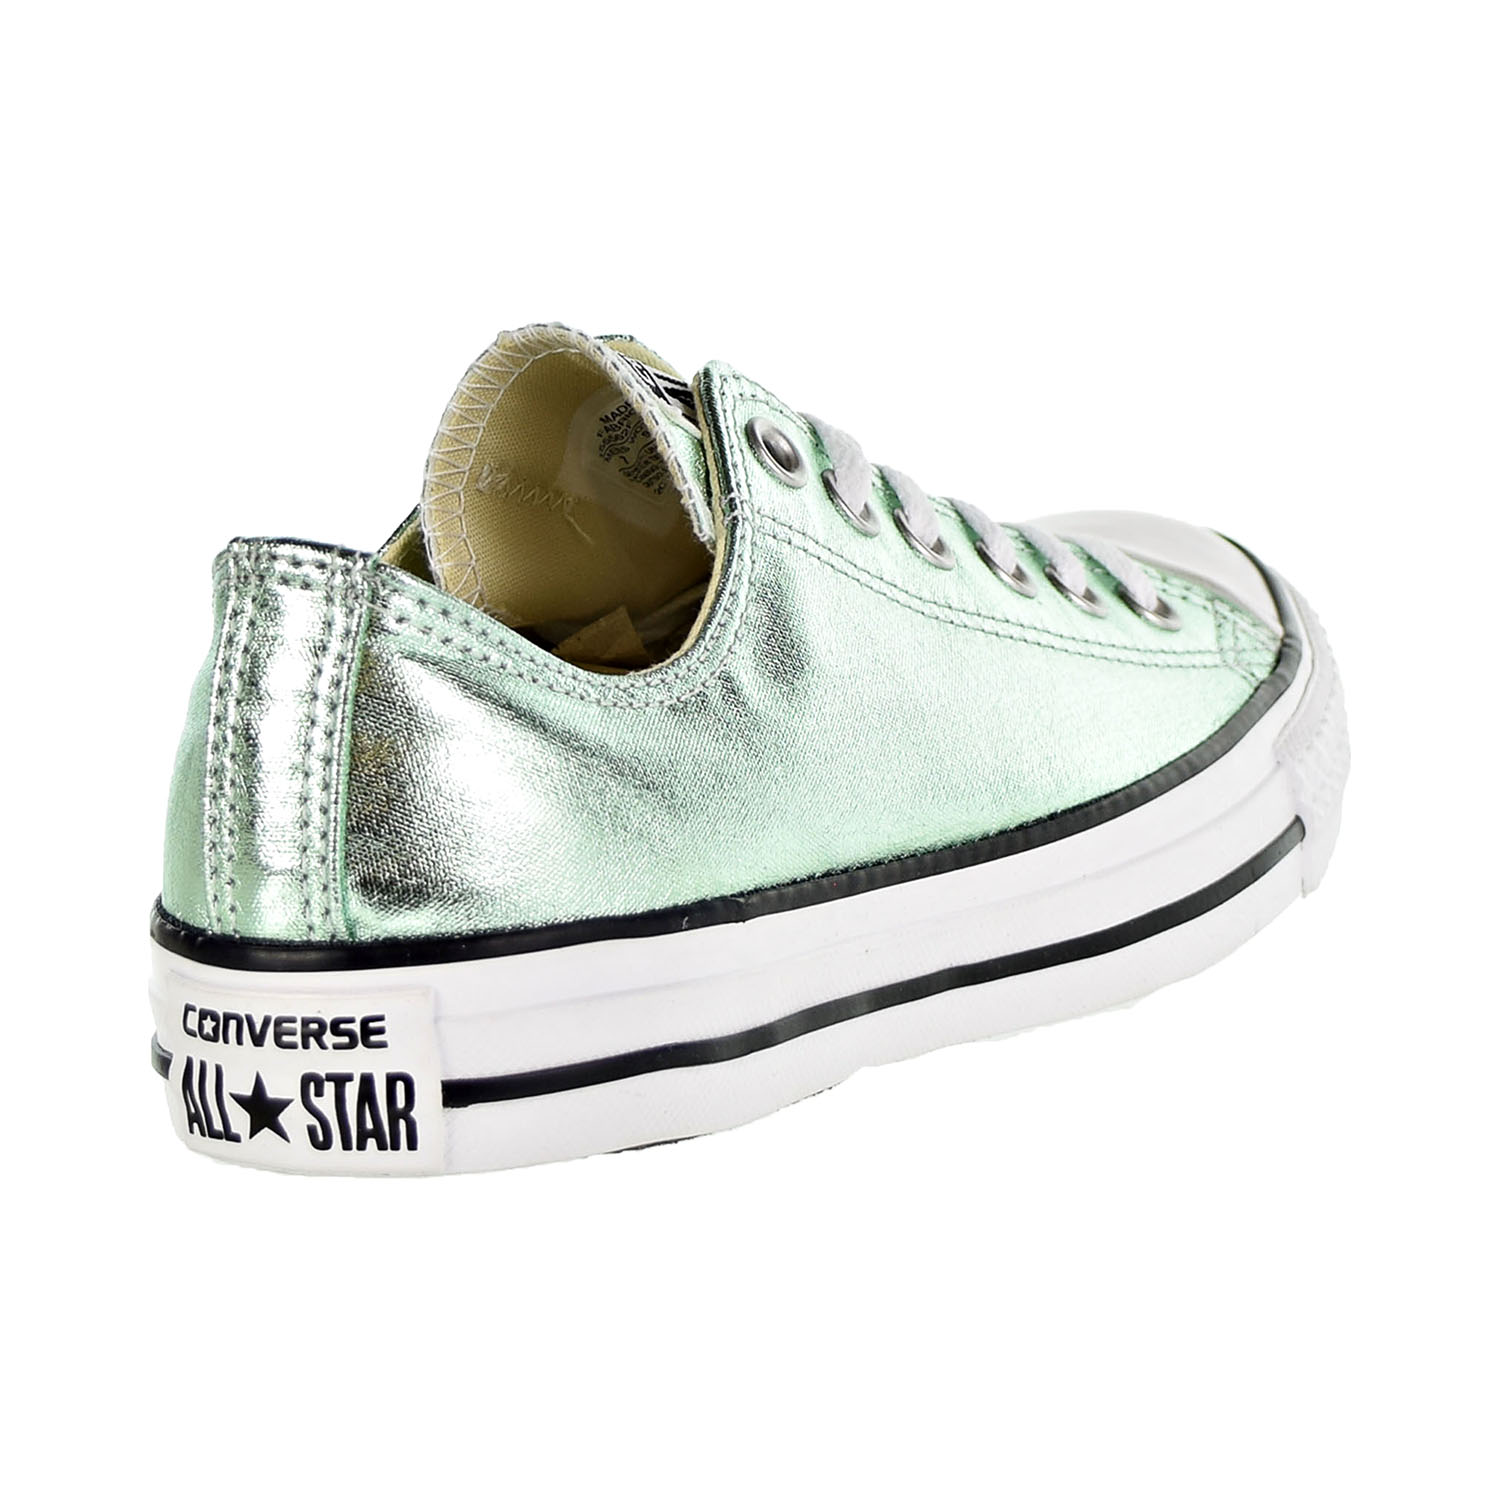 Converse Chuck Taylor All Star Ox Men's Shoes Jade-Black-White 155562f - image 4 of 6